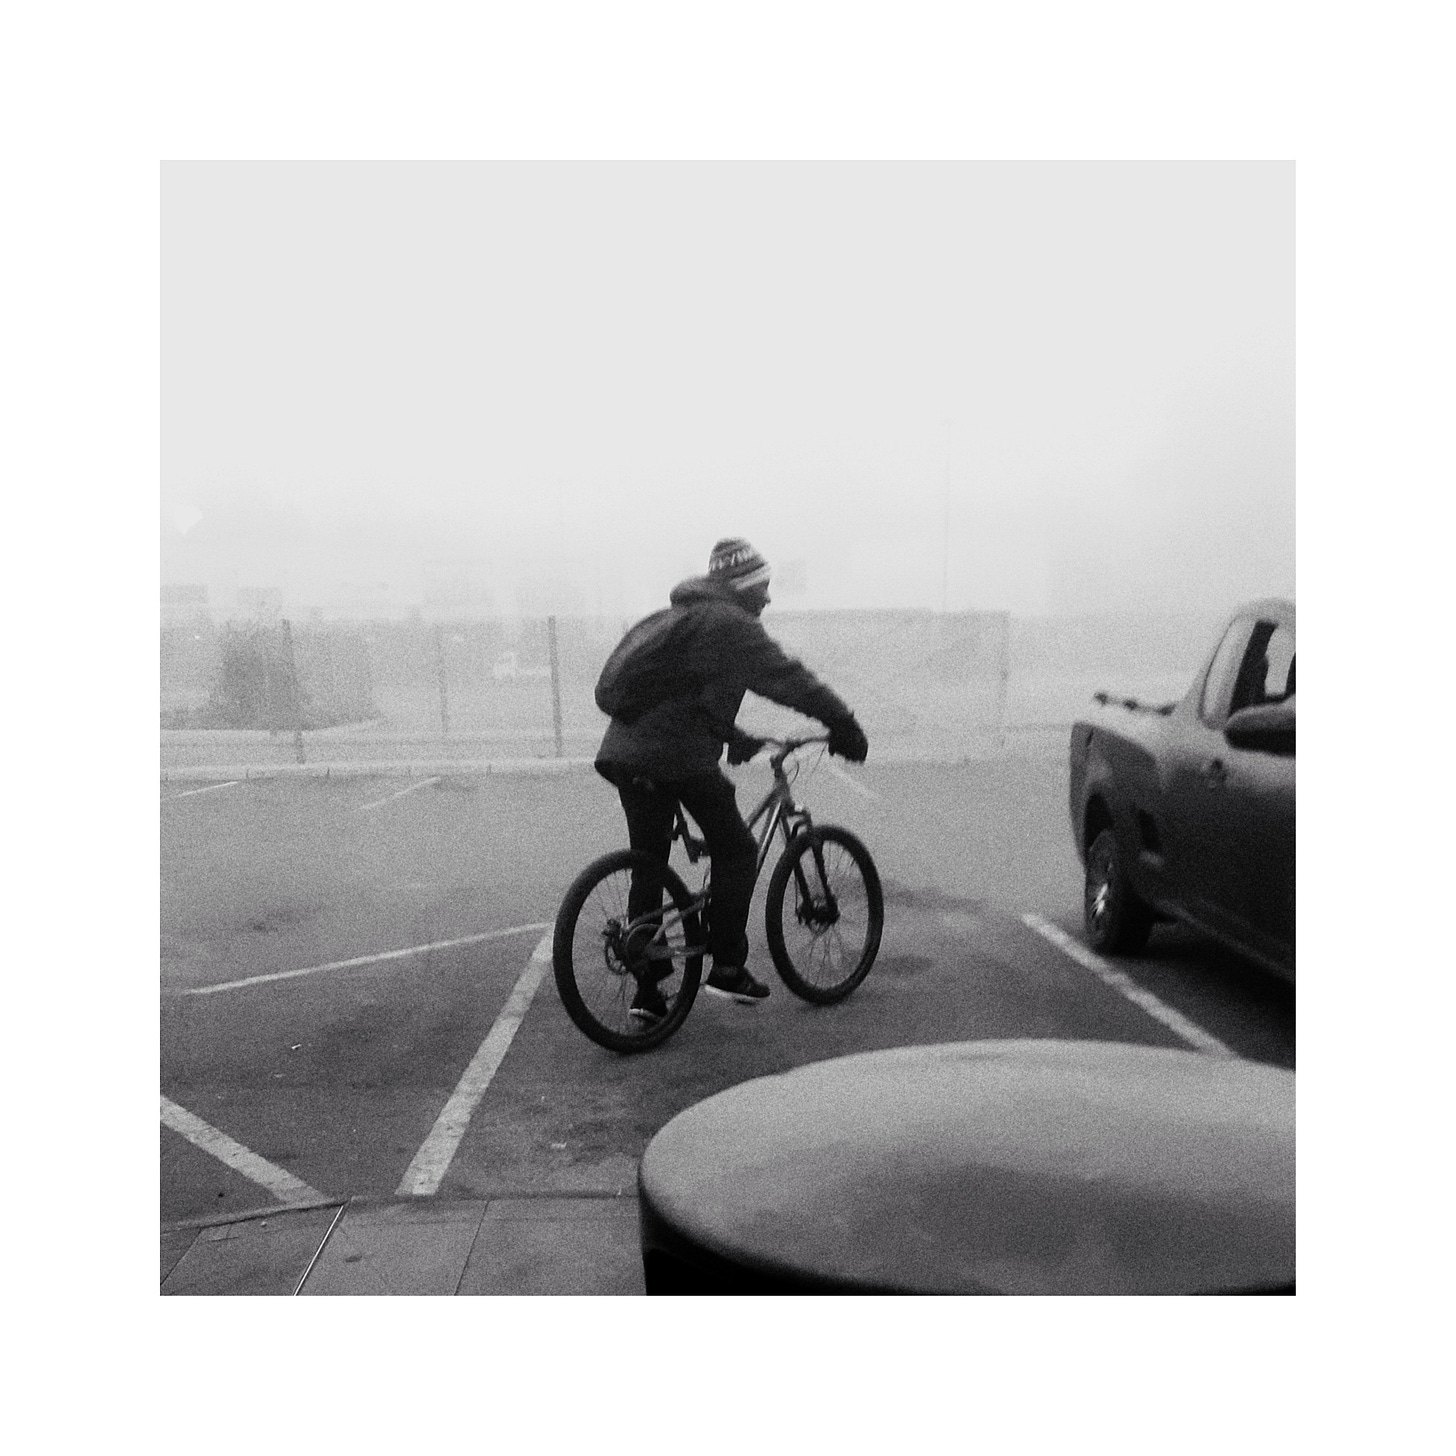 Man on a bicycle with a car to his right.